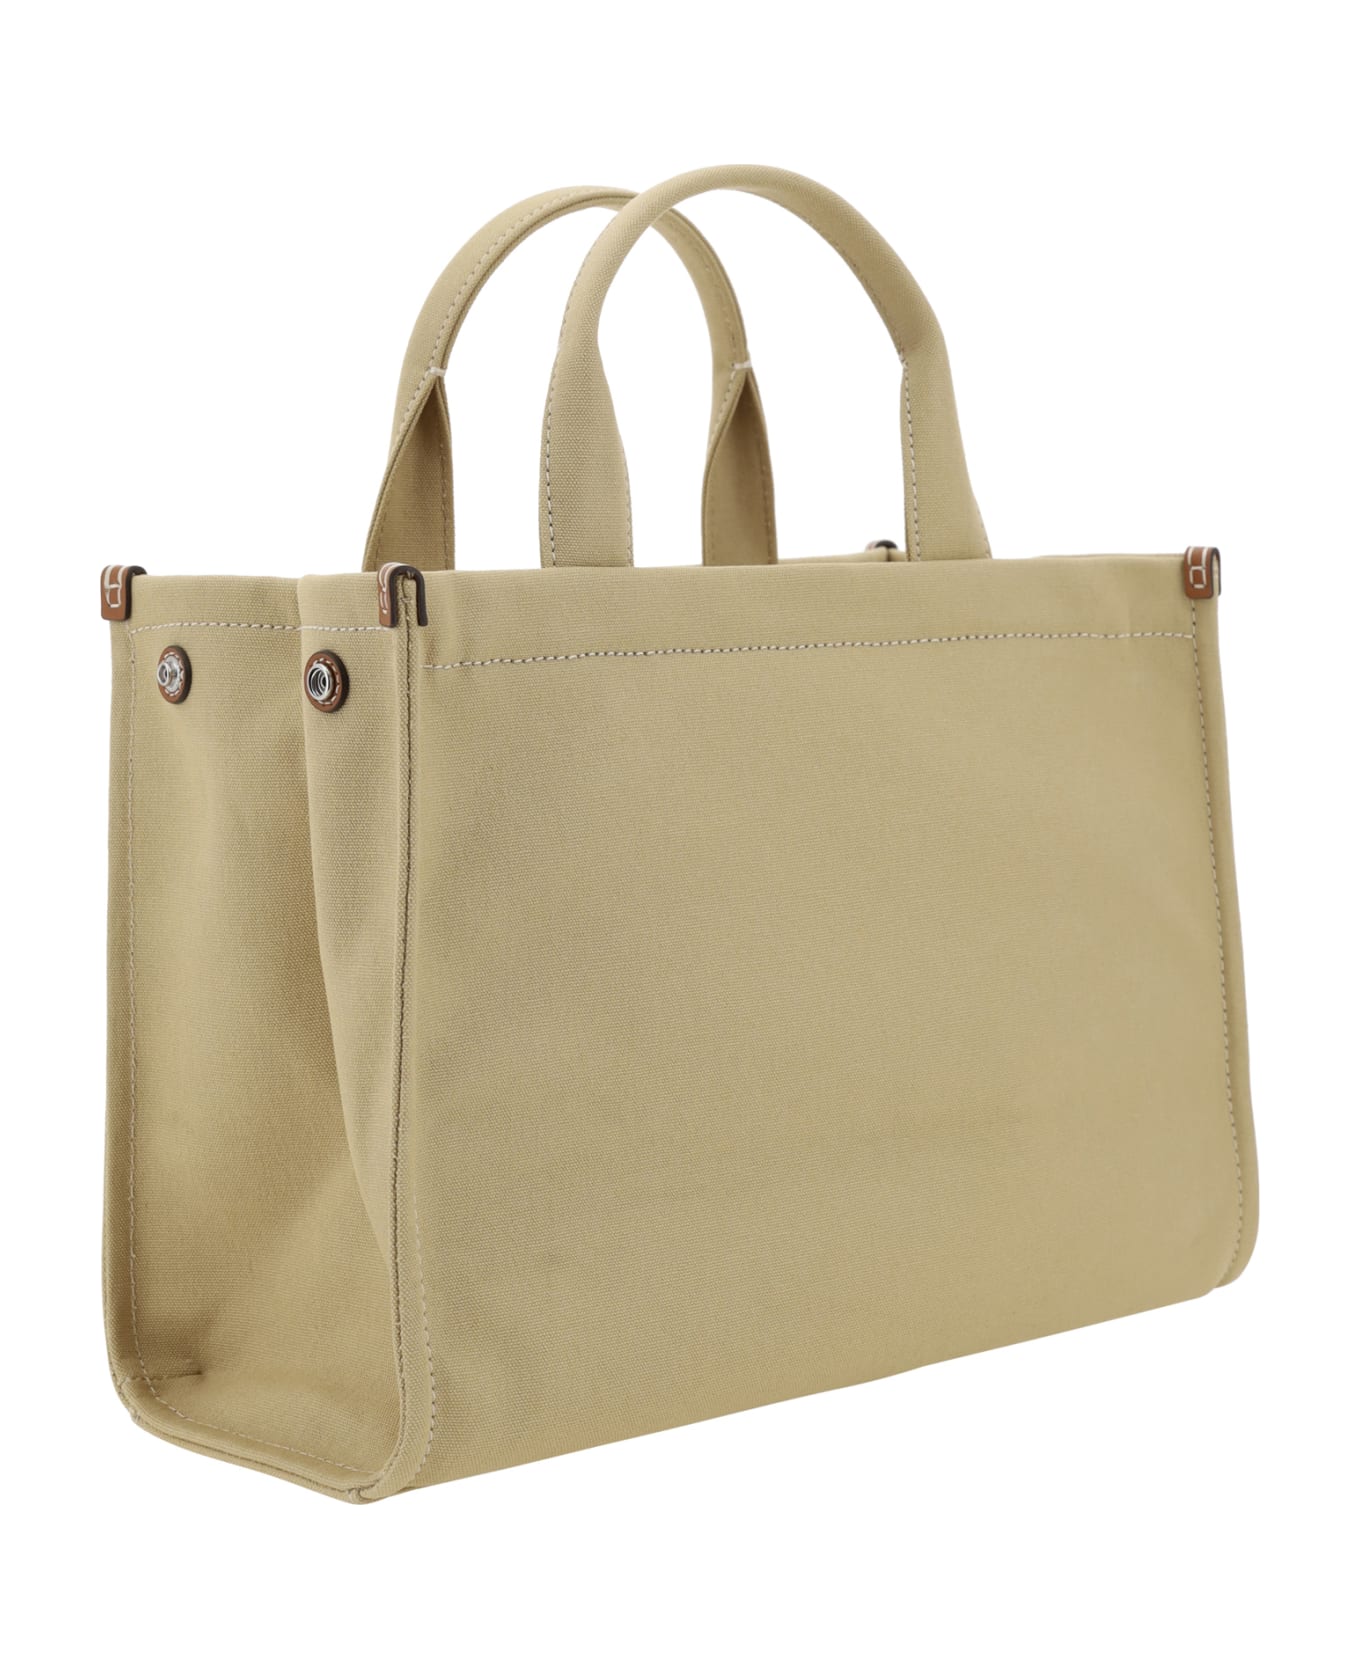 Tory Burch Tote - Hickory トートバッグ